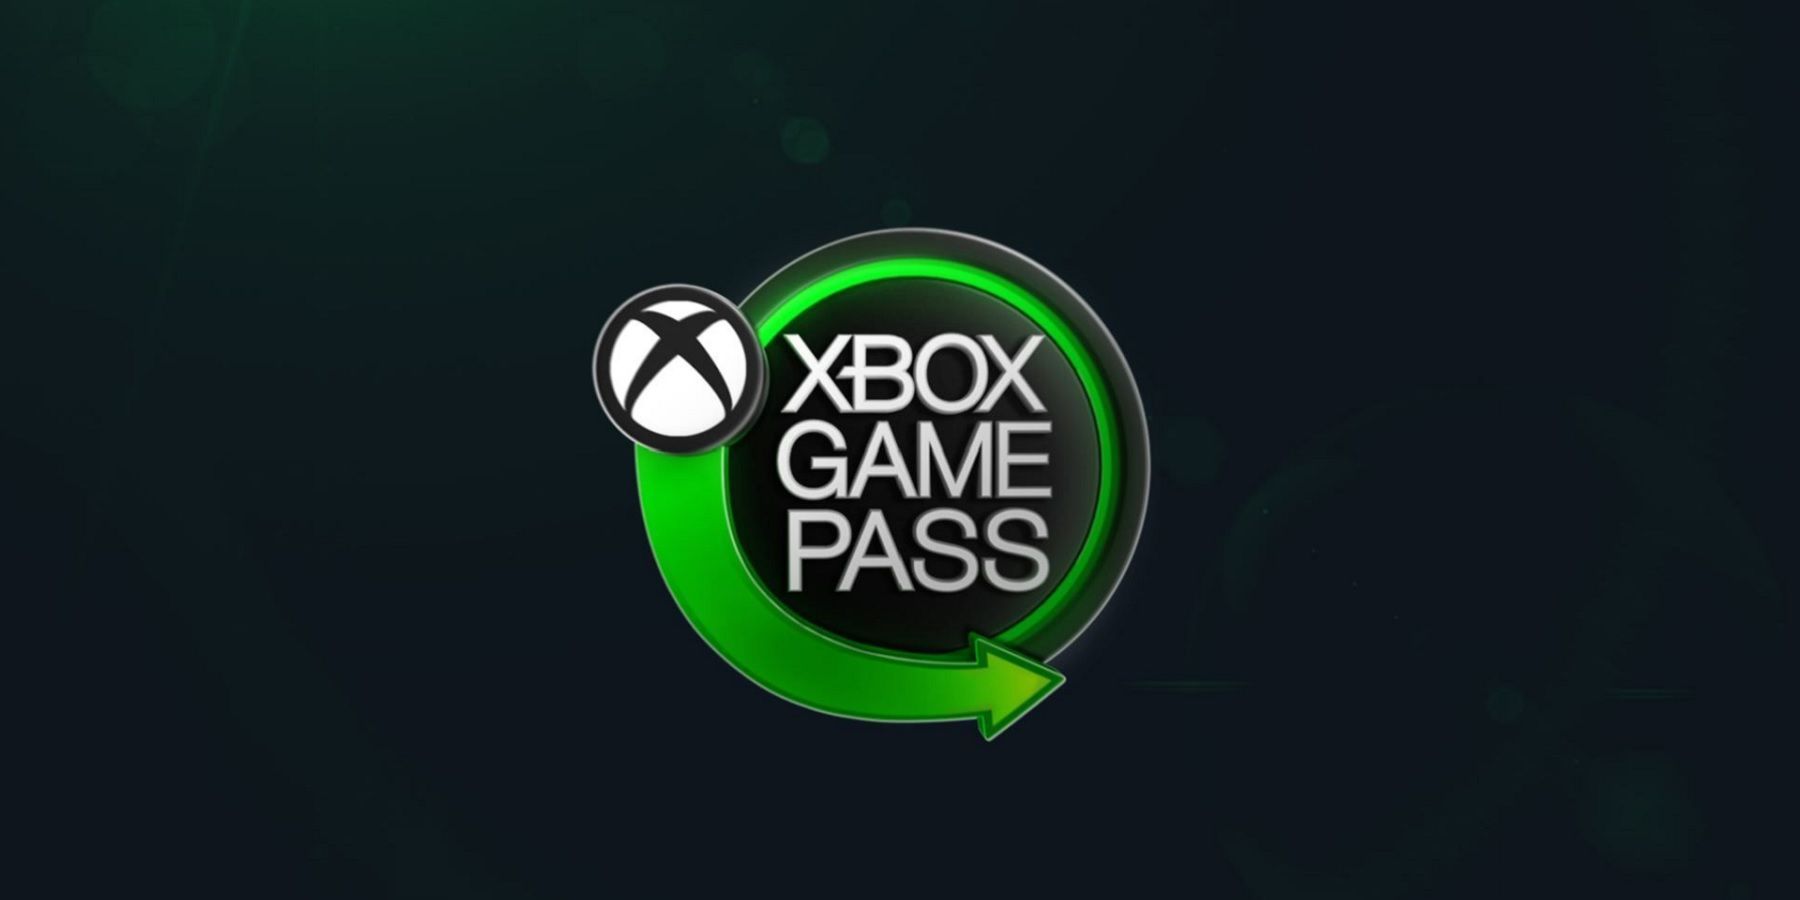 Xbox Game Pass Adds Two Games Today, Including Day One
Release